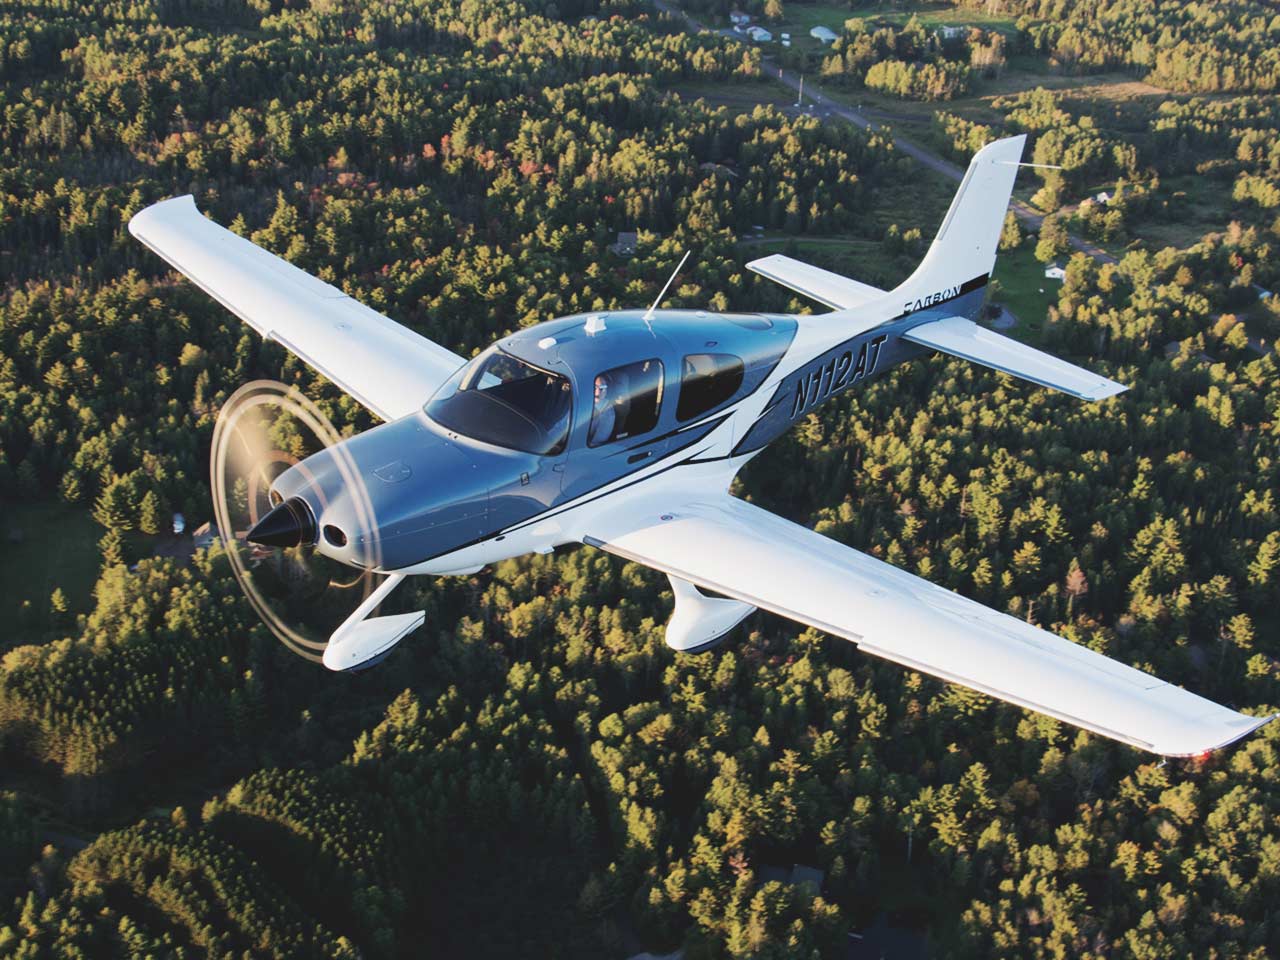 The Greatest Guide To Federal Aviation Administration Guidelines For New Pilots